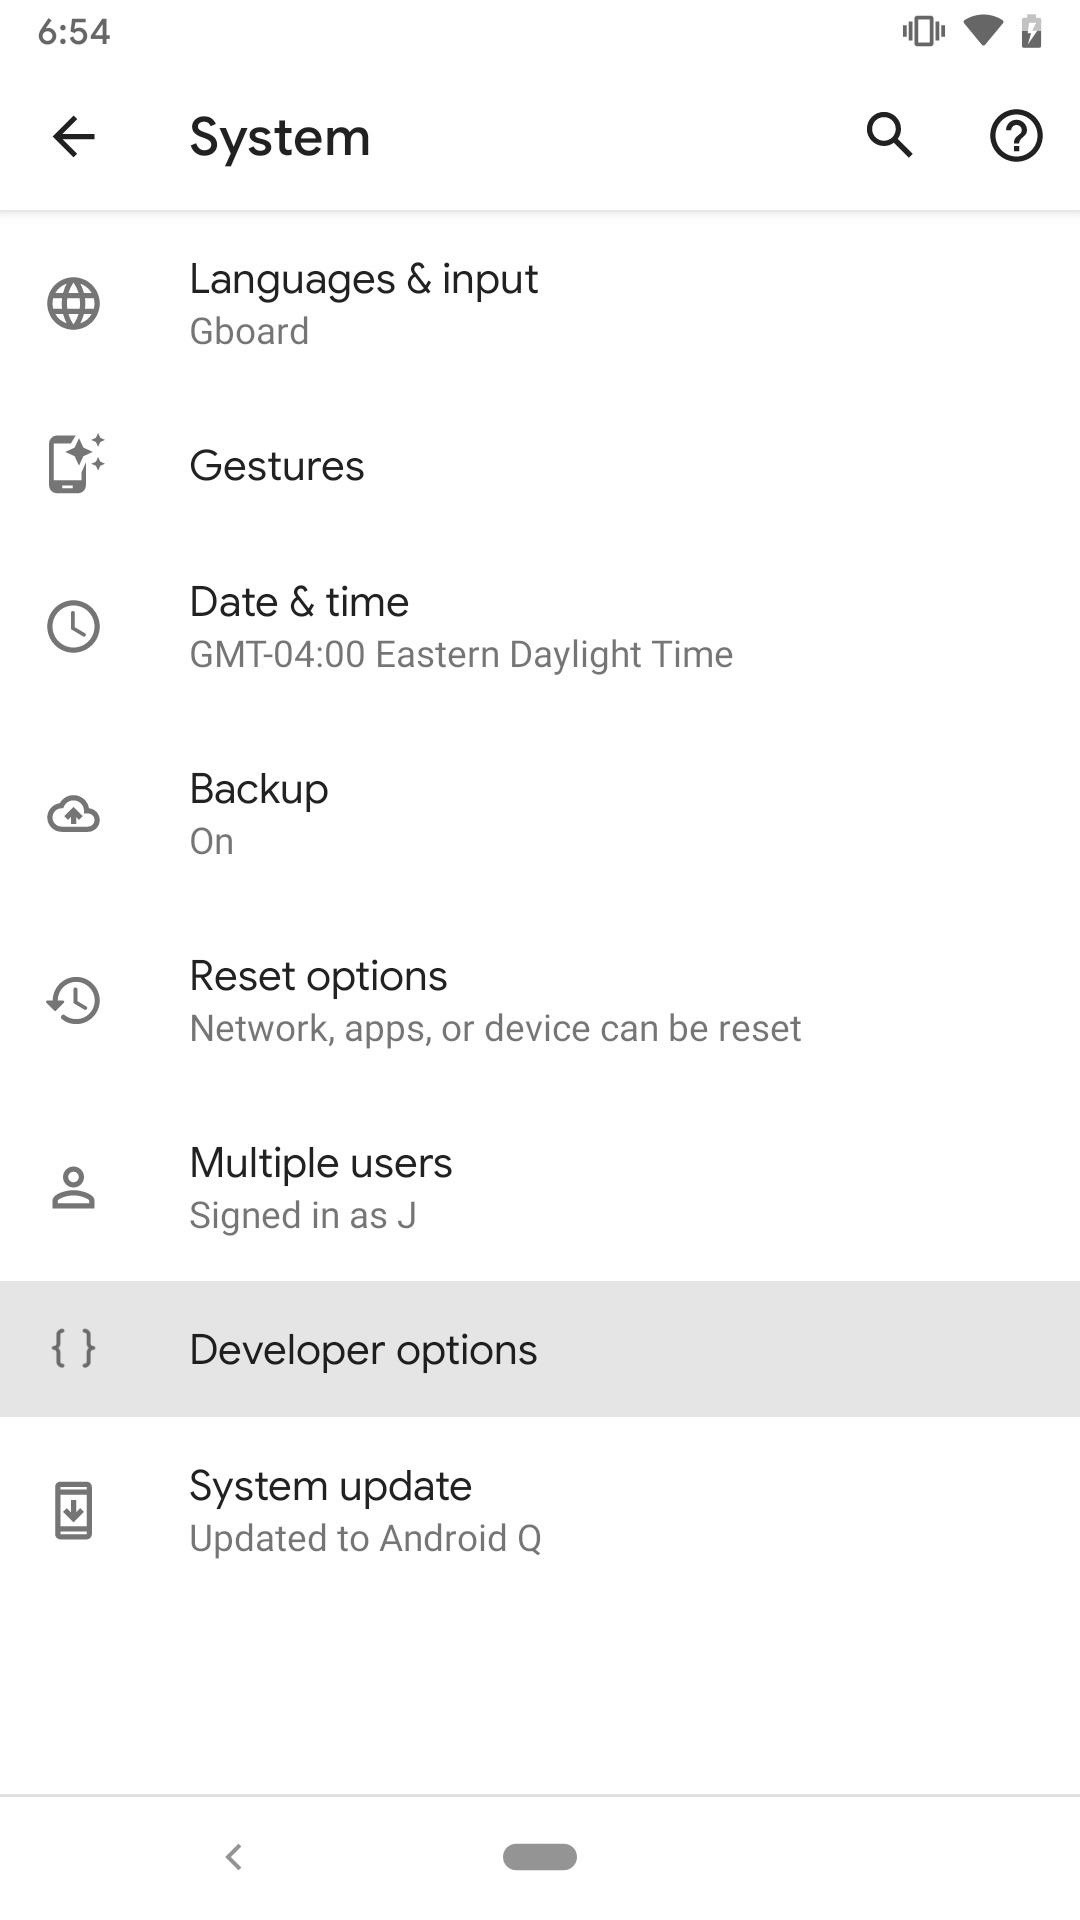 typhoon hobby Specialize How to Enable Built-in Screen Recorder on Android 10